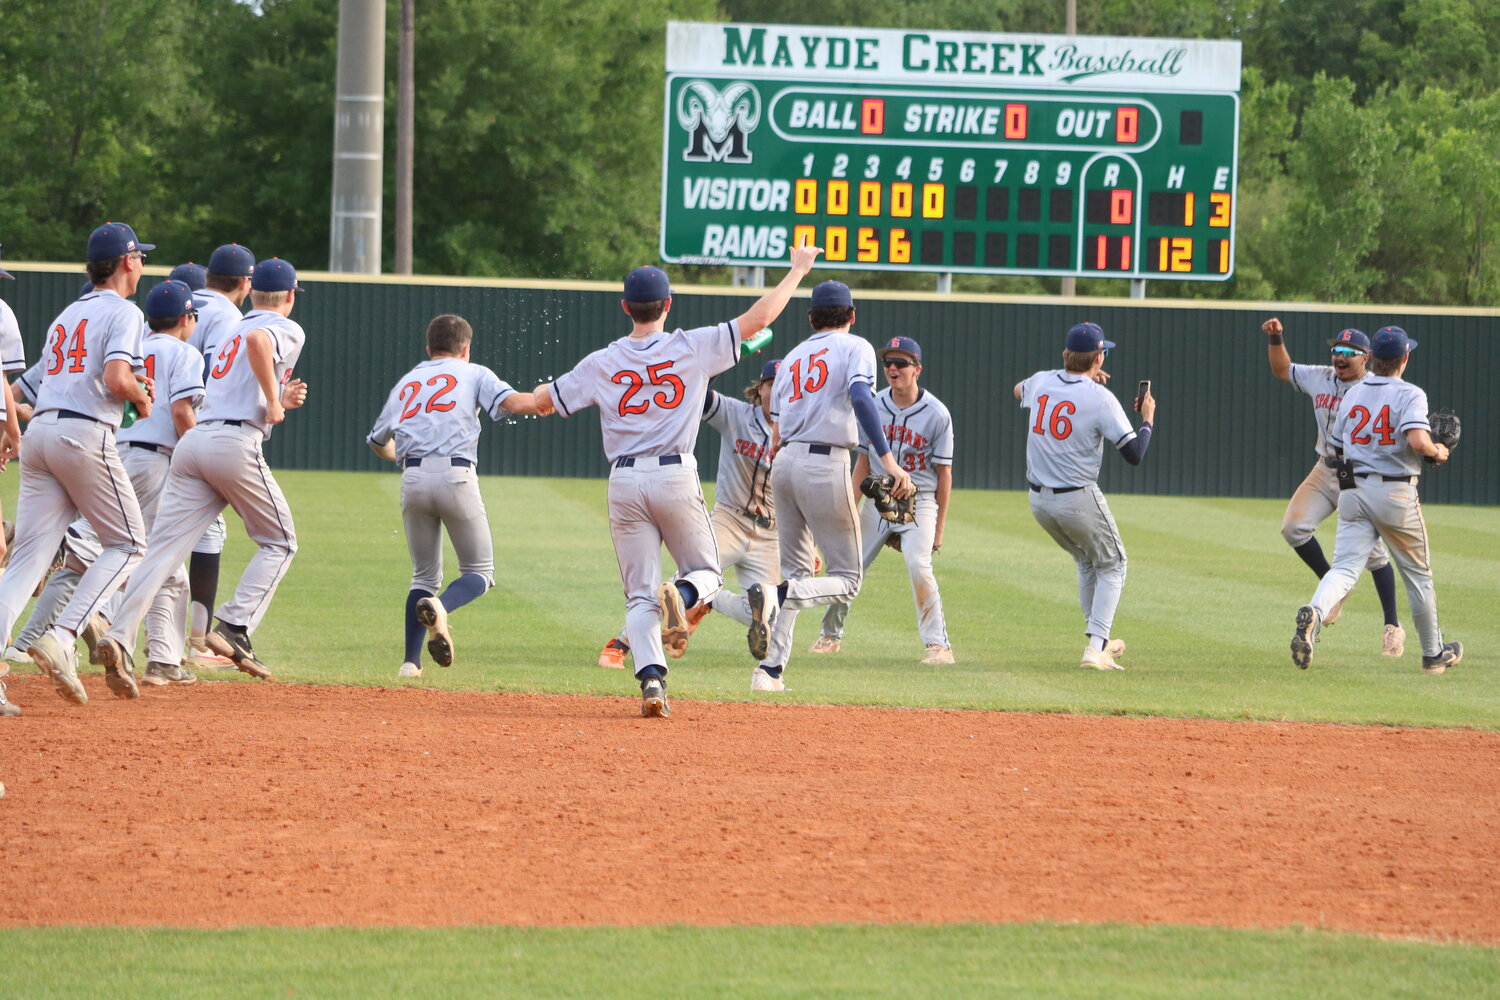 Seven Lakes players celebrate after winning Monday's District 19-6A play-in game between Seven Lakes and Taylor at the Mayde Creek baseball field.